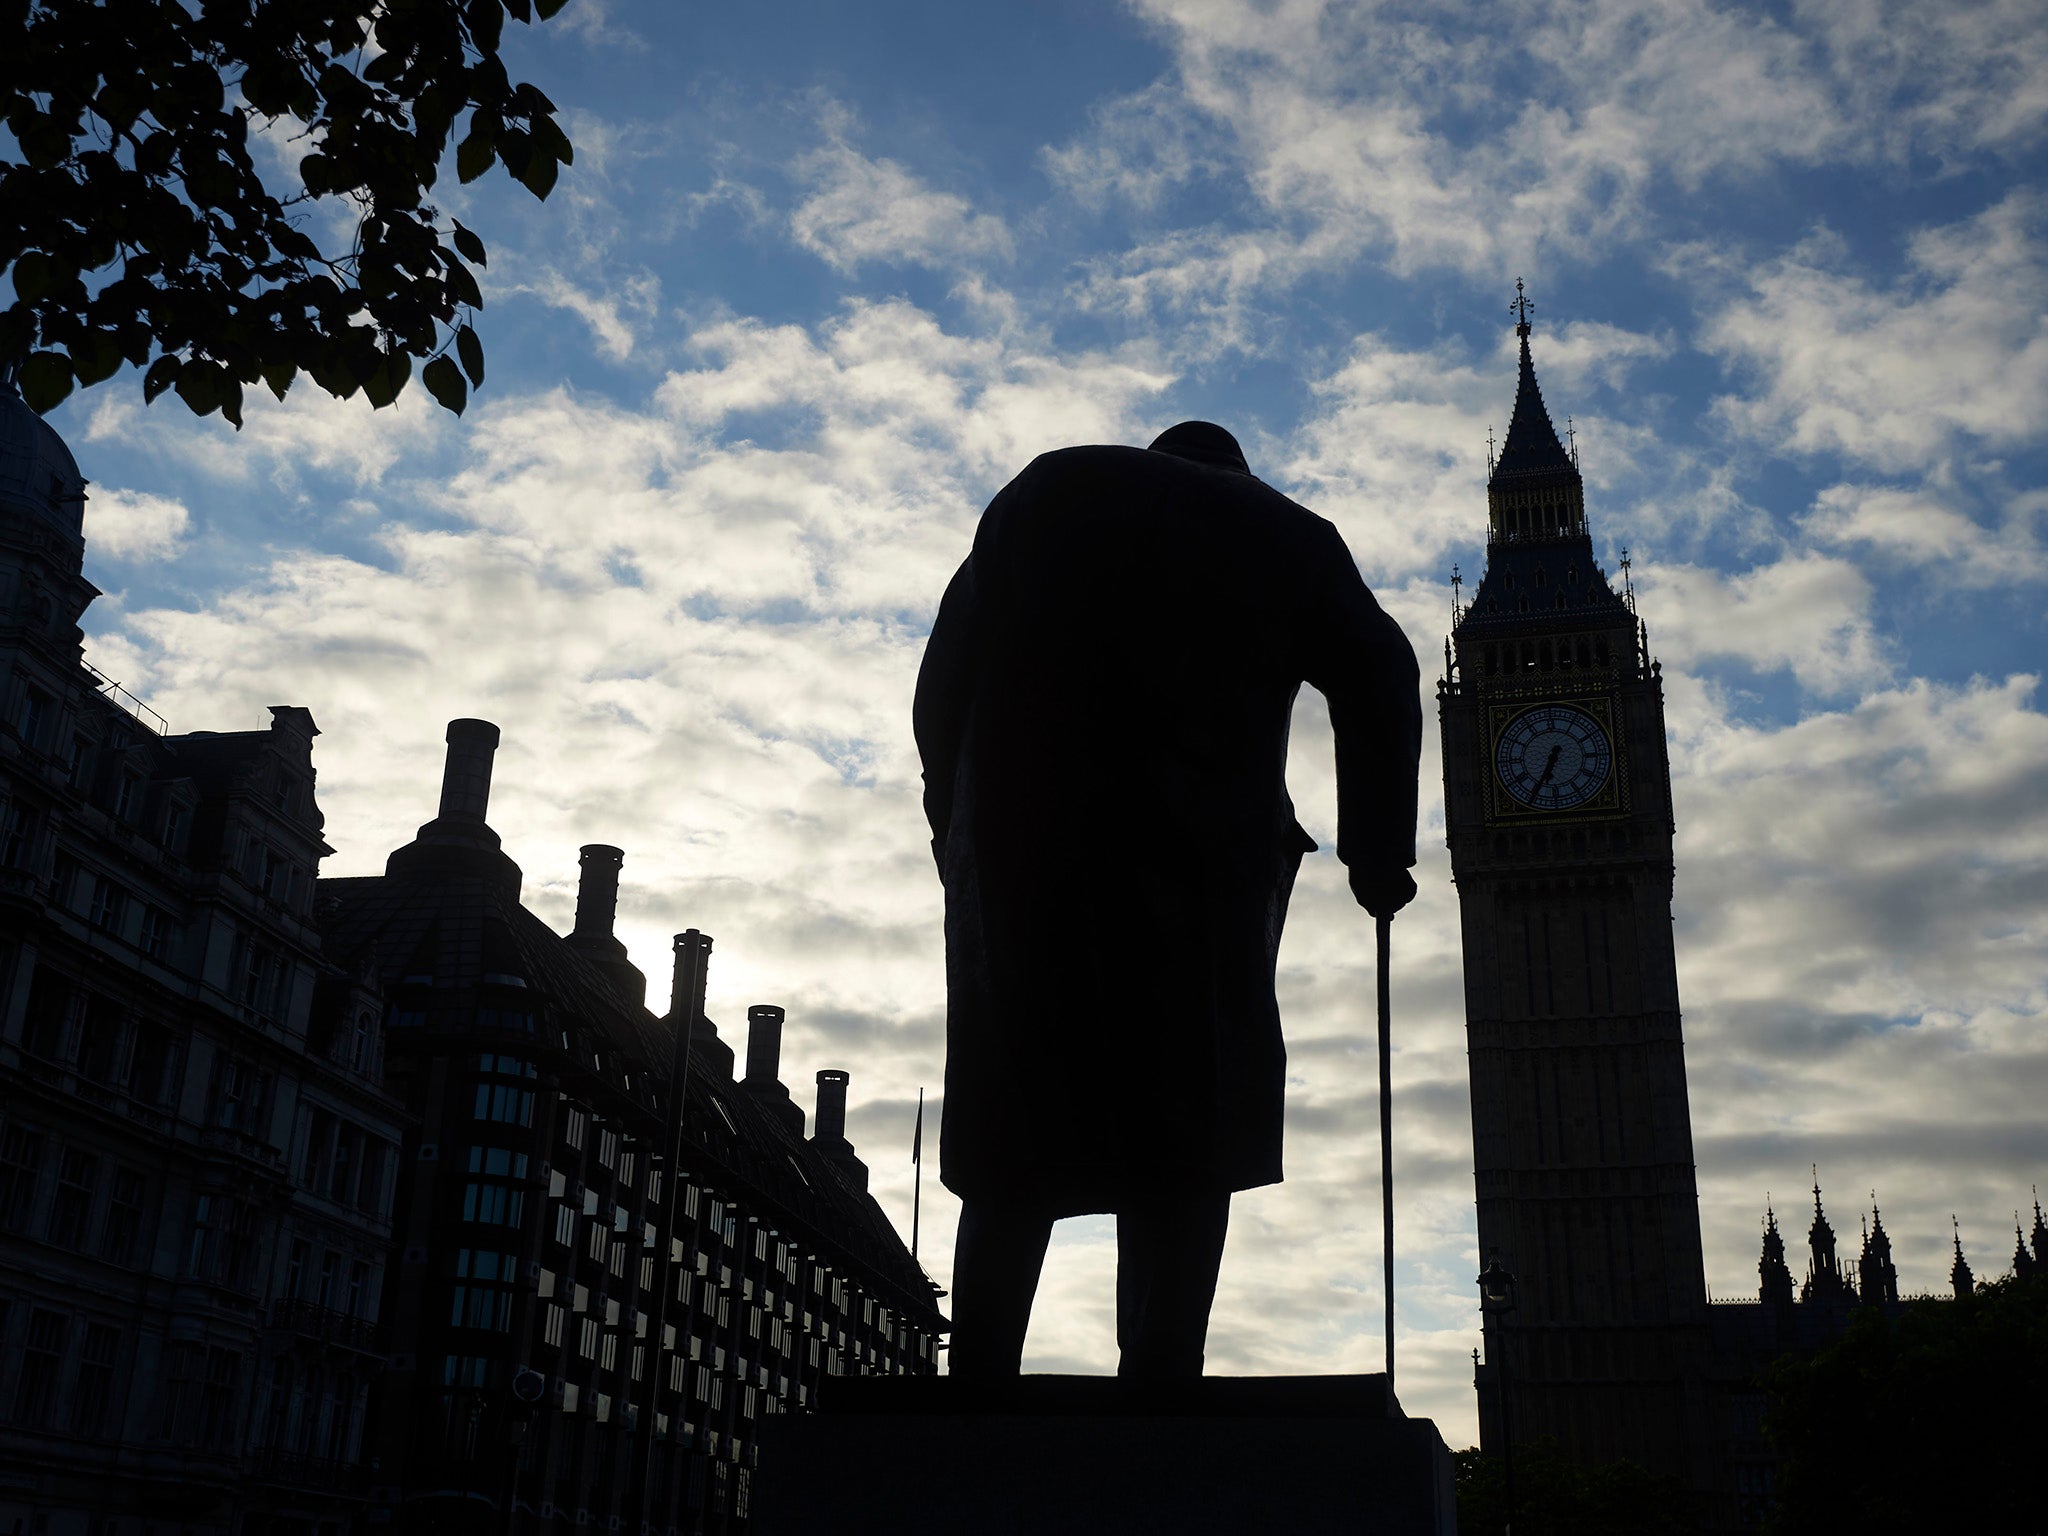 A bronze statue of Churchill looks out over Big Ben in London